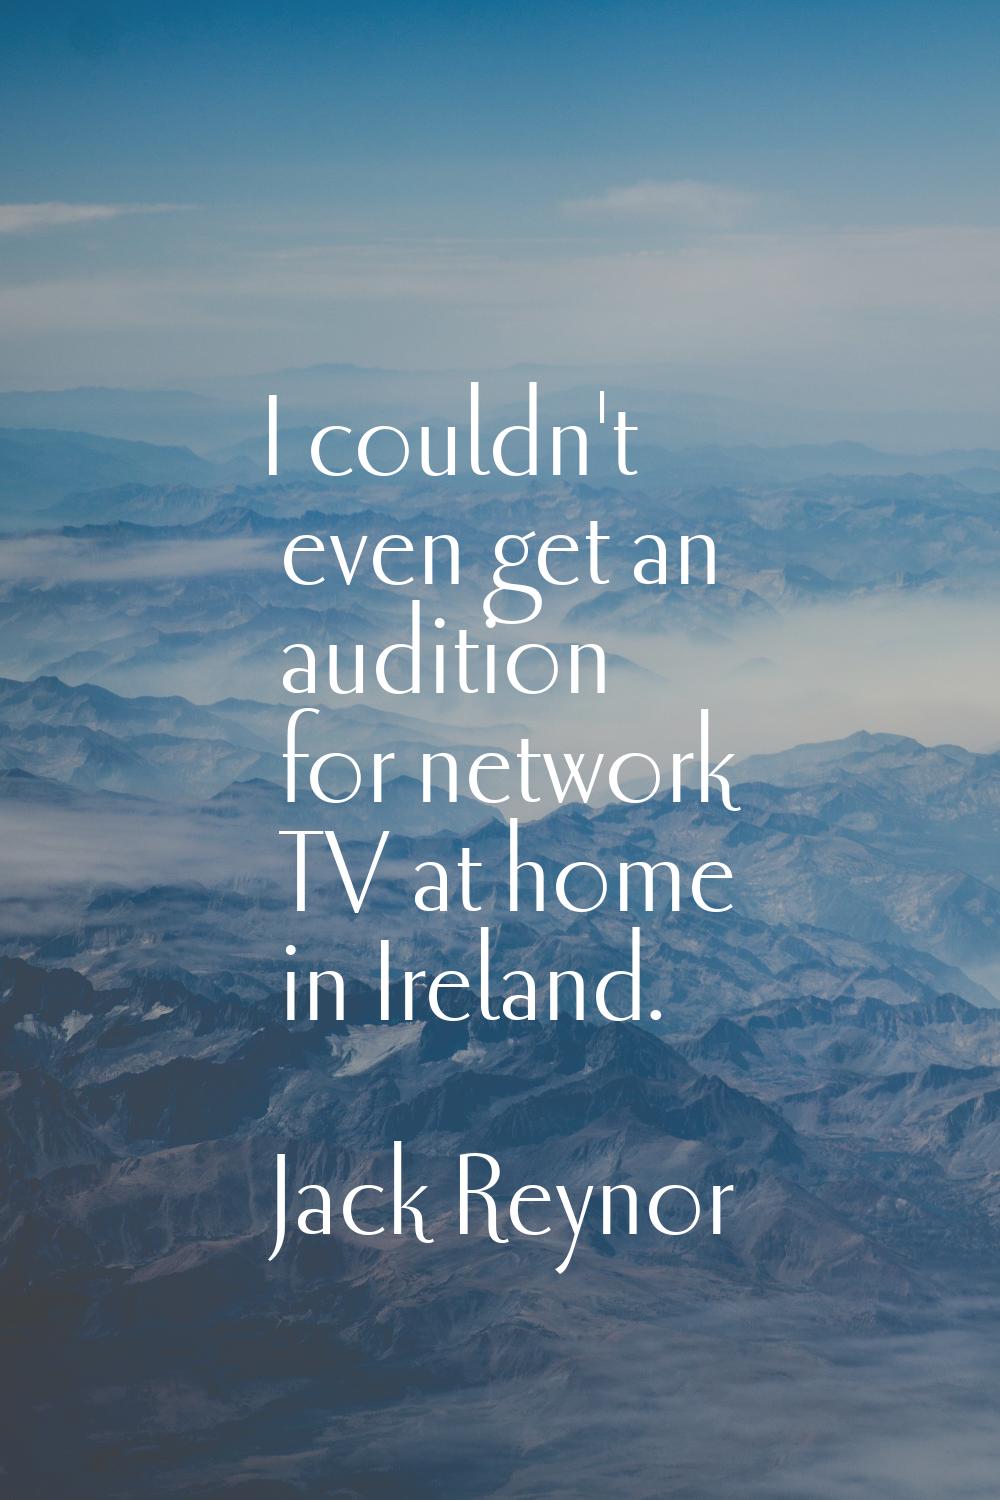 I couldn't even get an audition for network TV at home in Ireland.